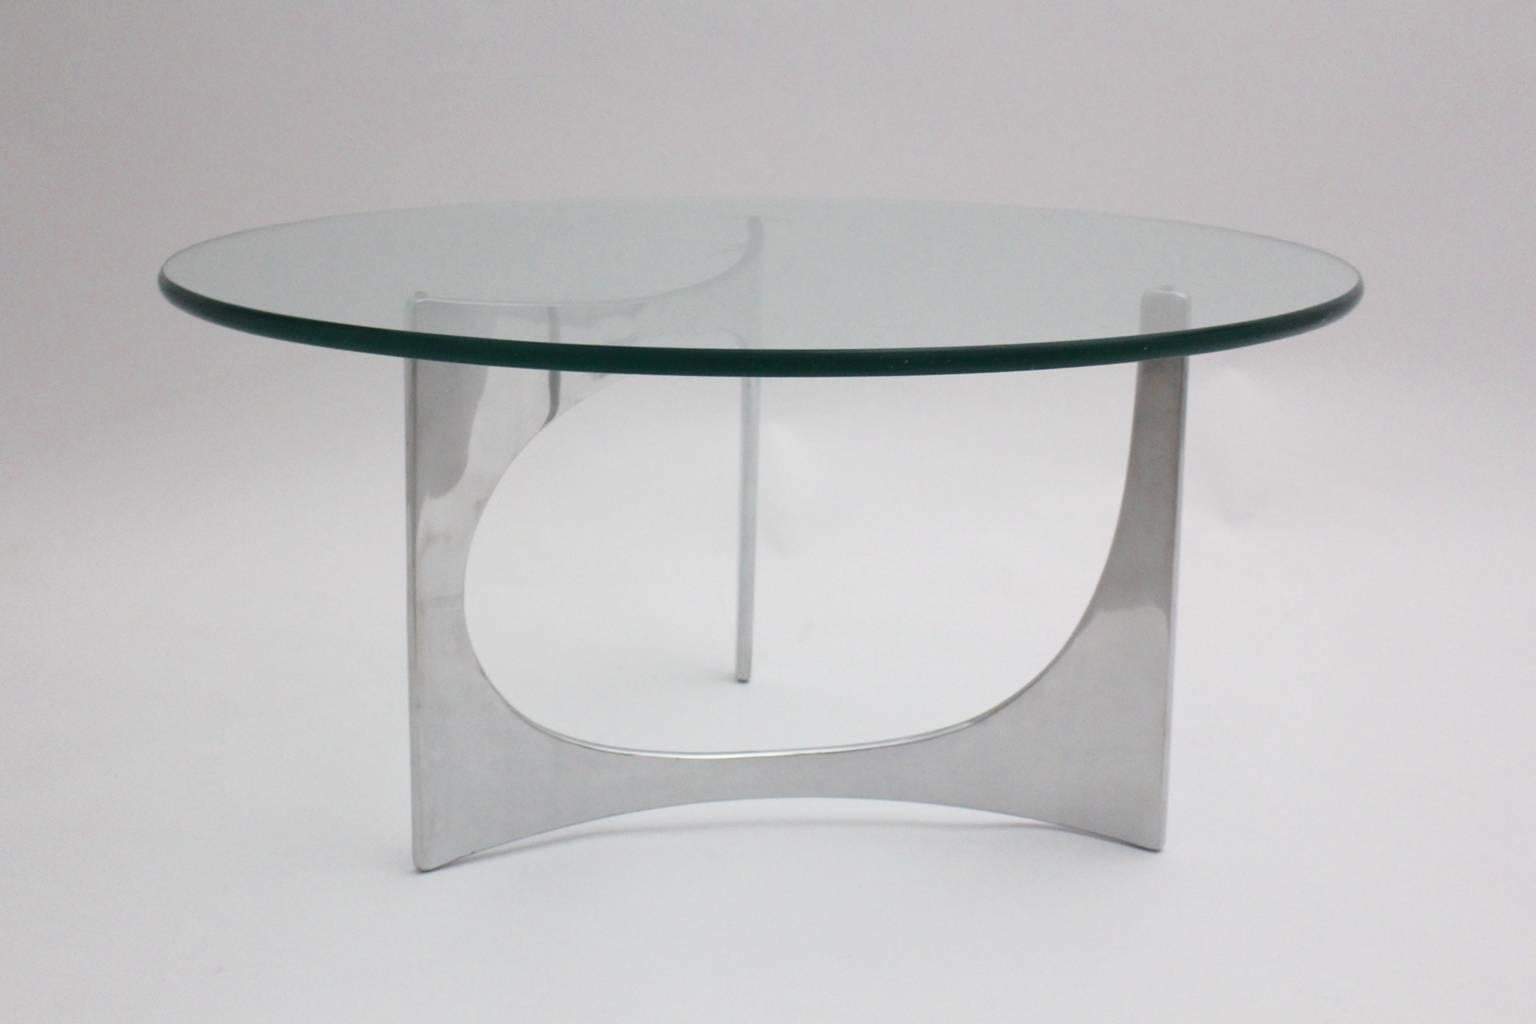 Space Age Silver Aluminum Glass Vintage Coffee Table by Knut Hesterberg c 1970 In Good Condition For Sale In Vienna, AT